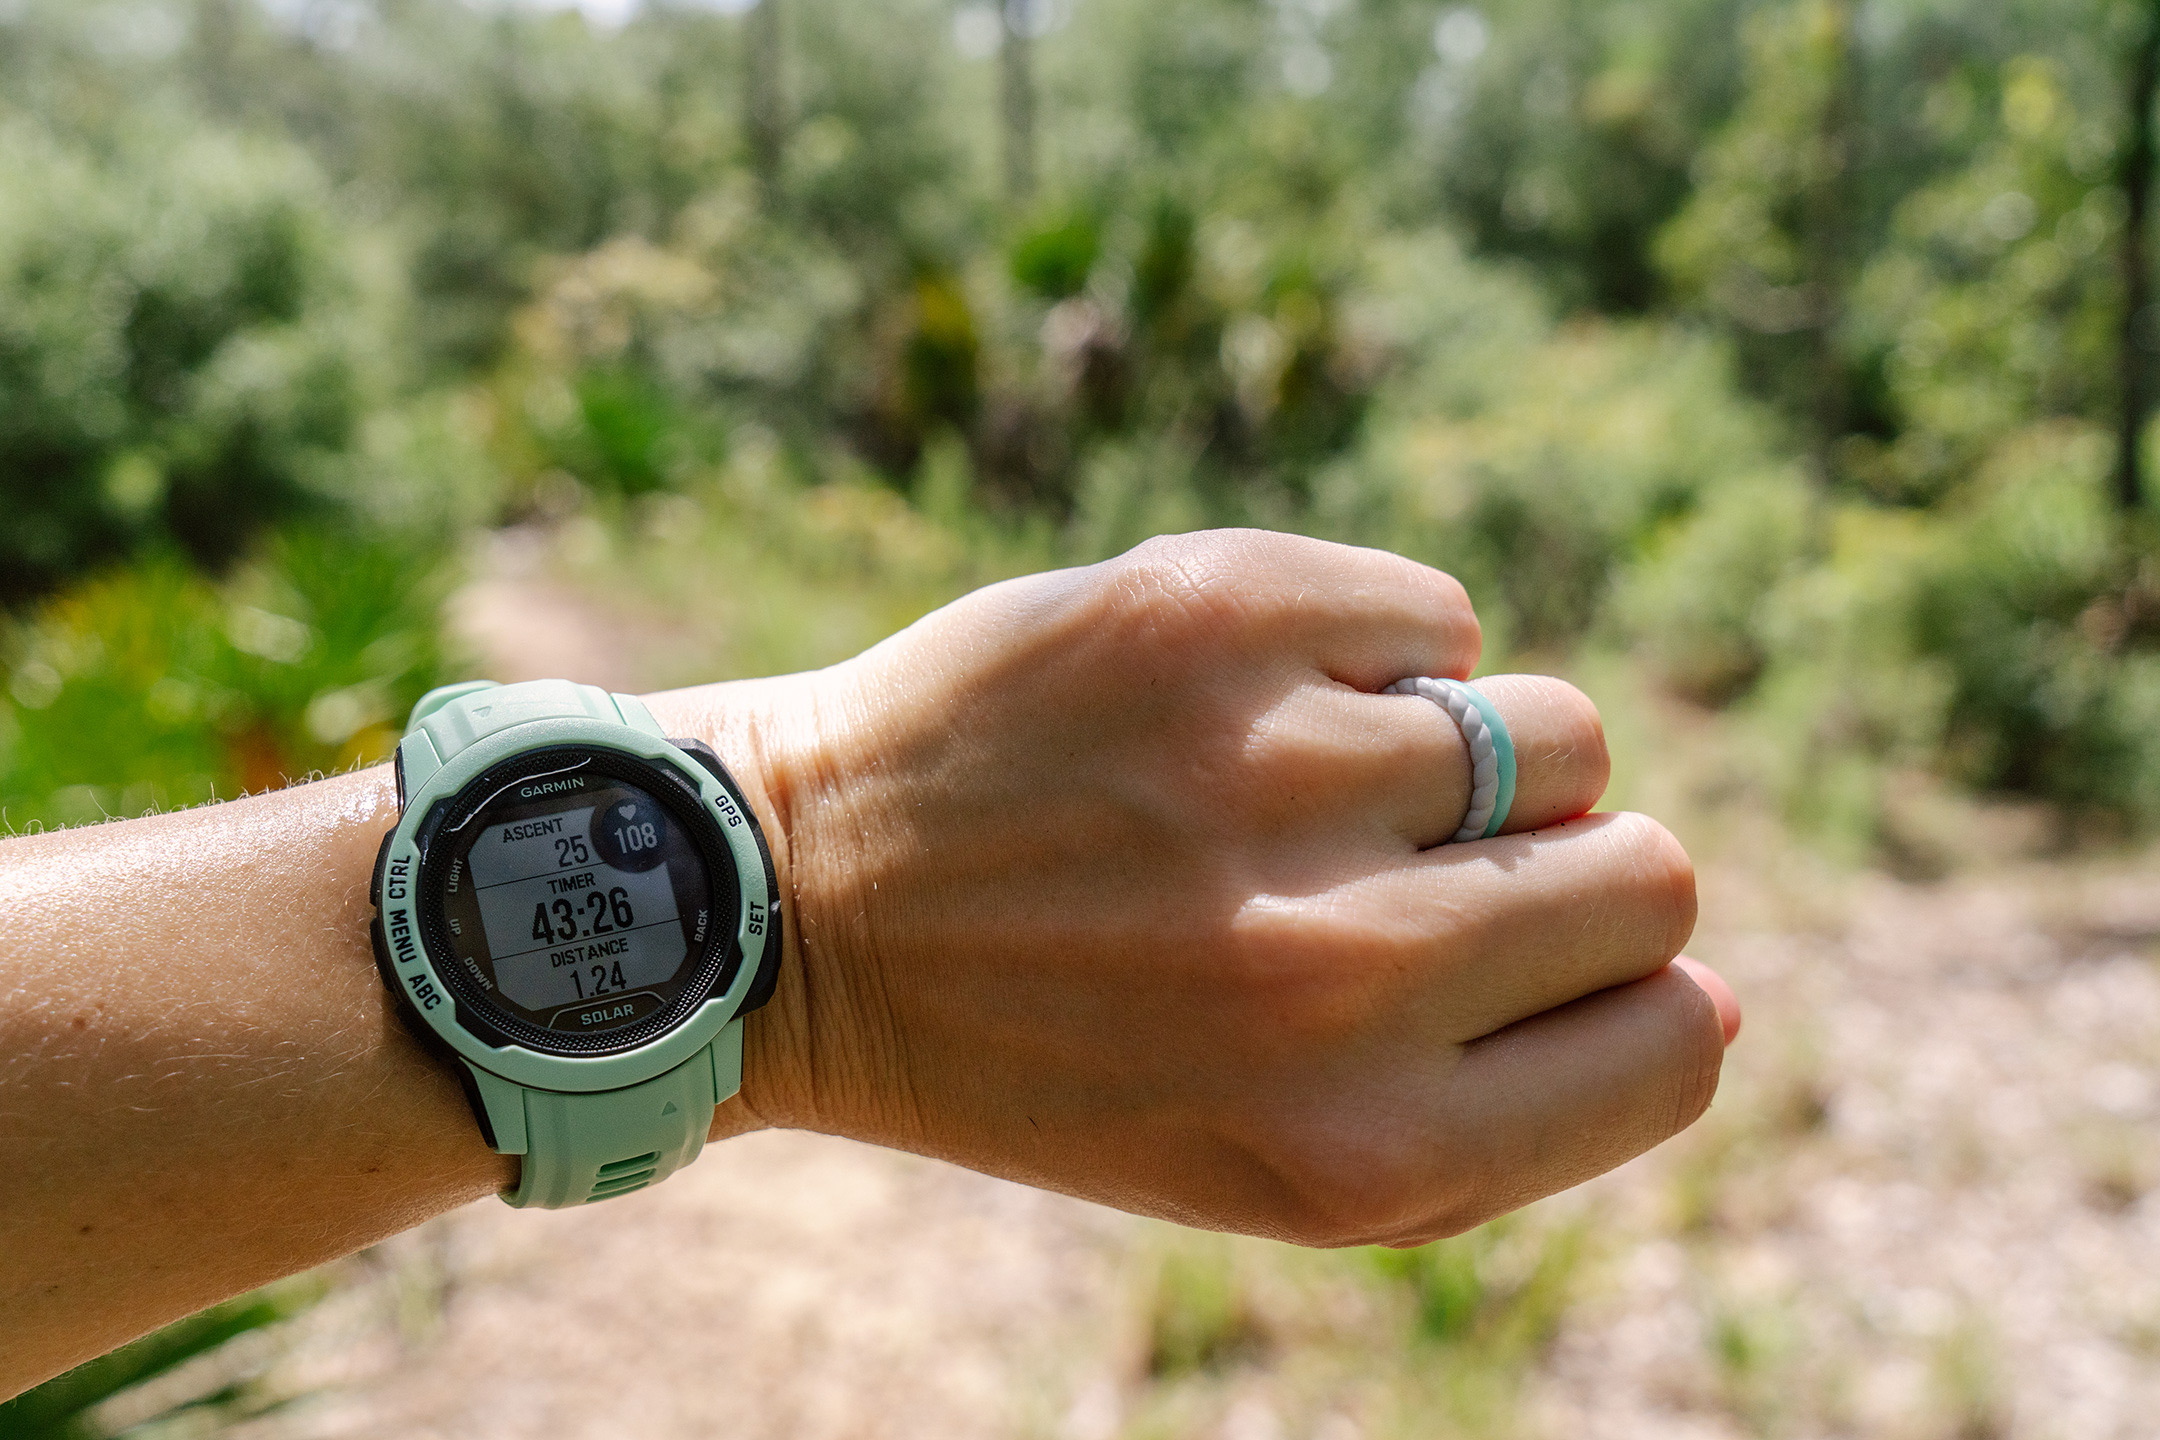 The Garmin Instinct 2S Solar fitness and smartwatch on a wrist with a forest in the background